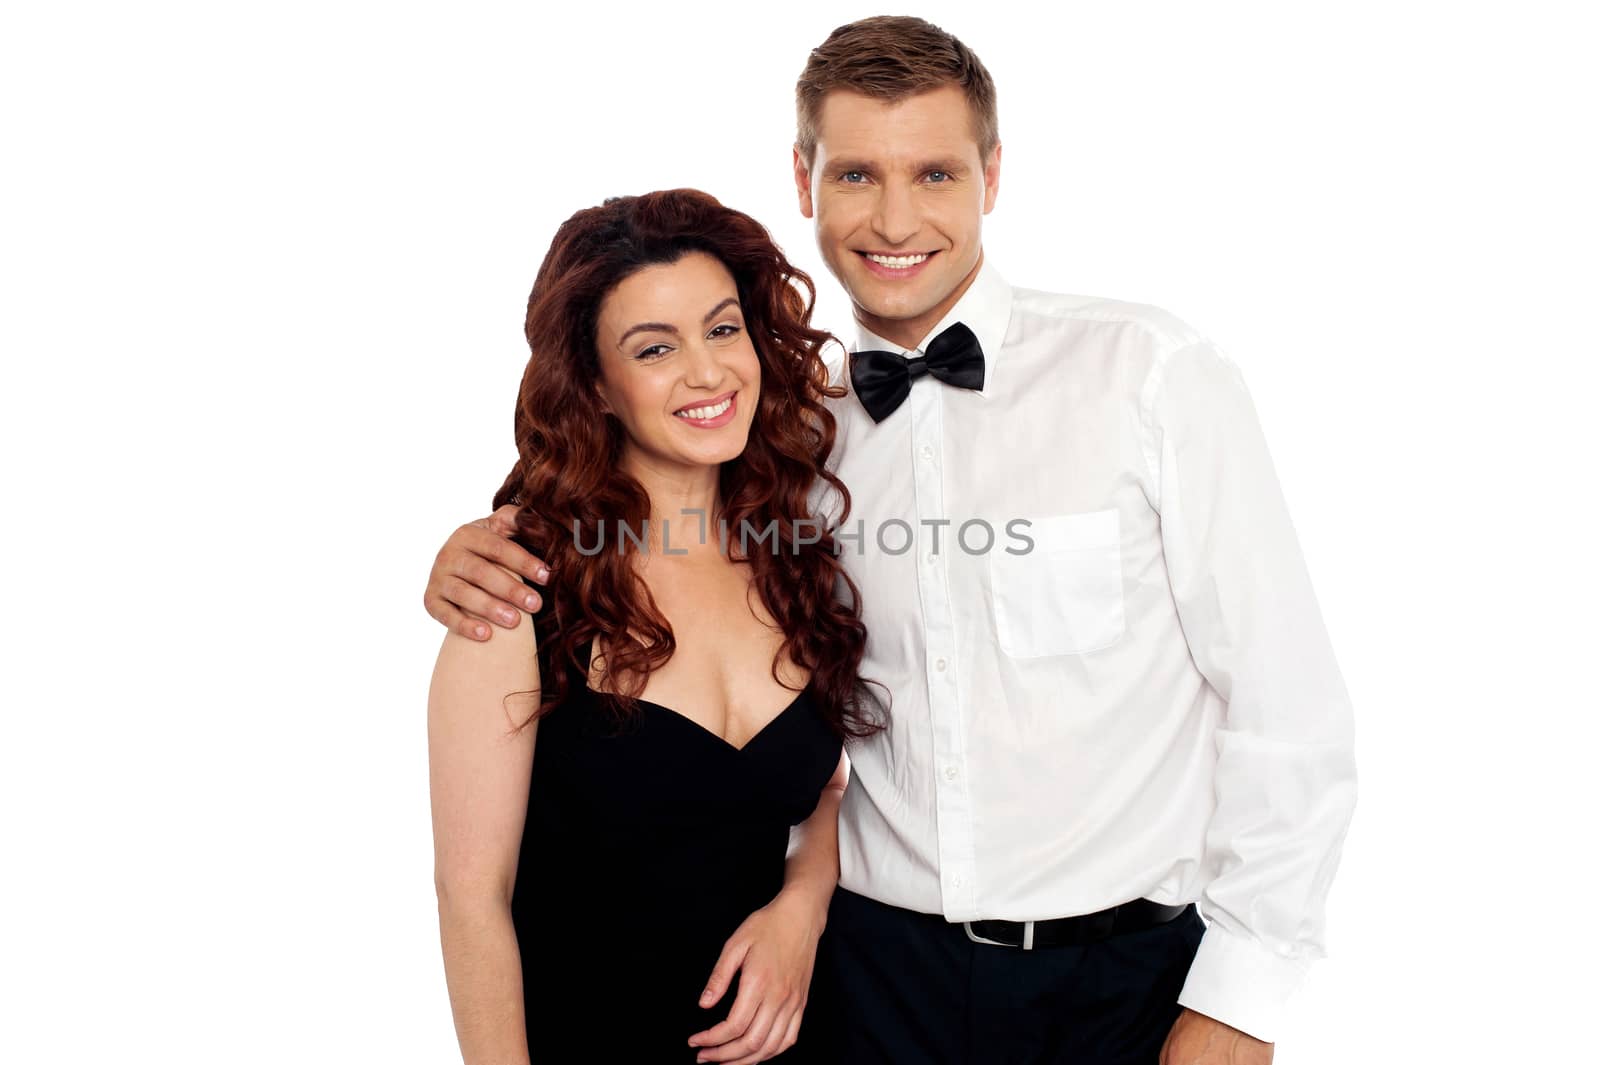 Profile shot of a romantic cheerful  couple posing together against white background